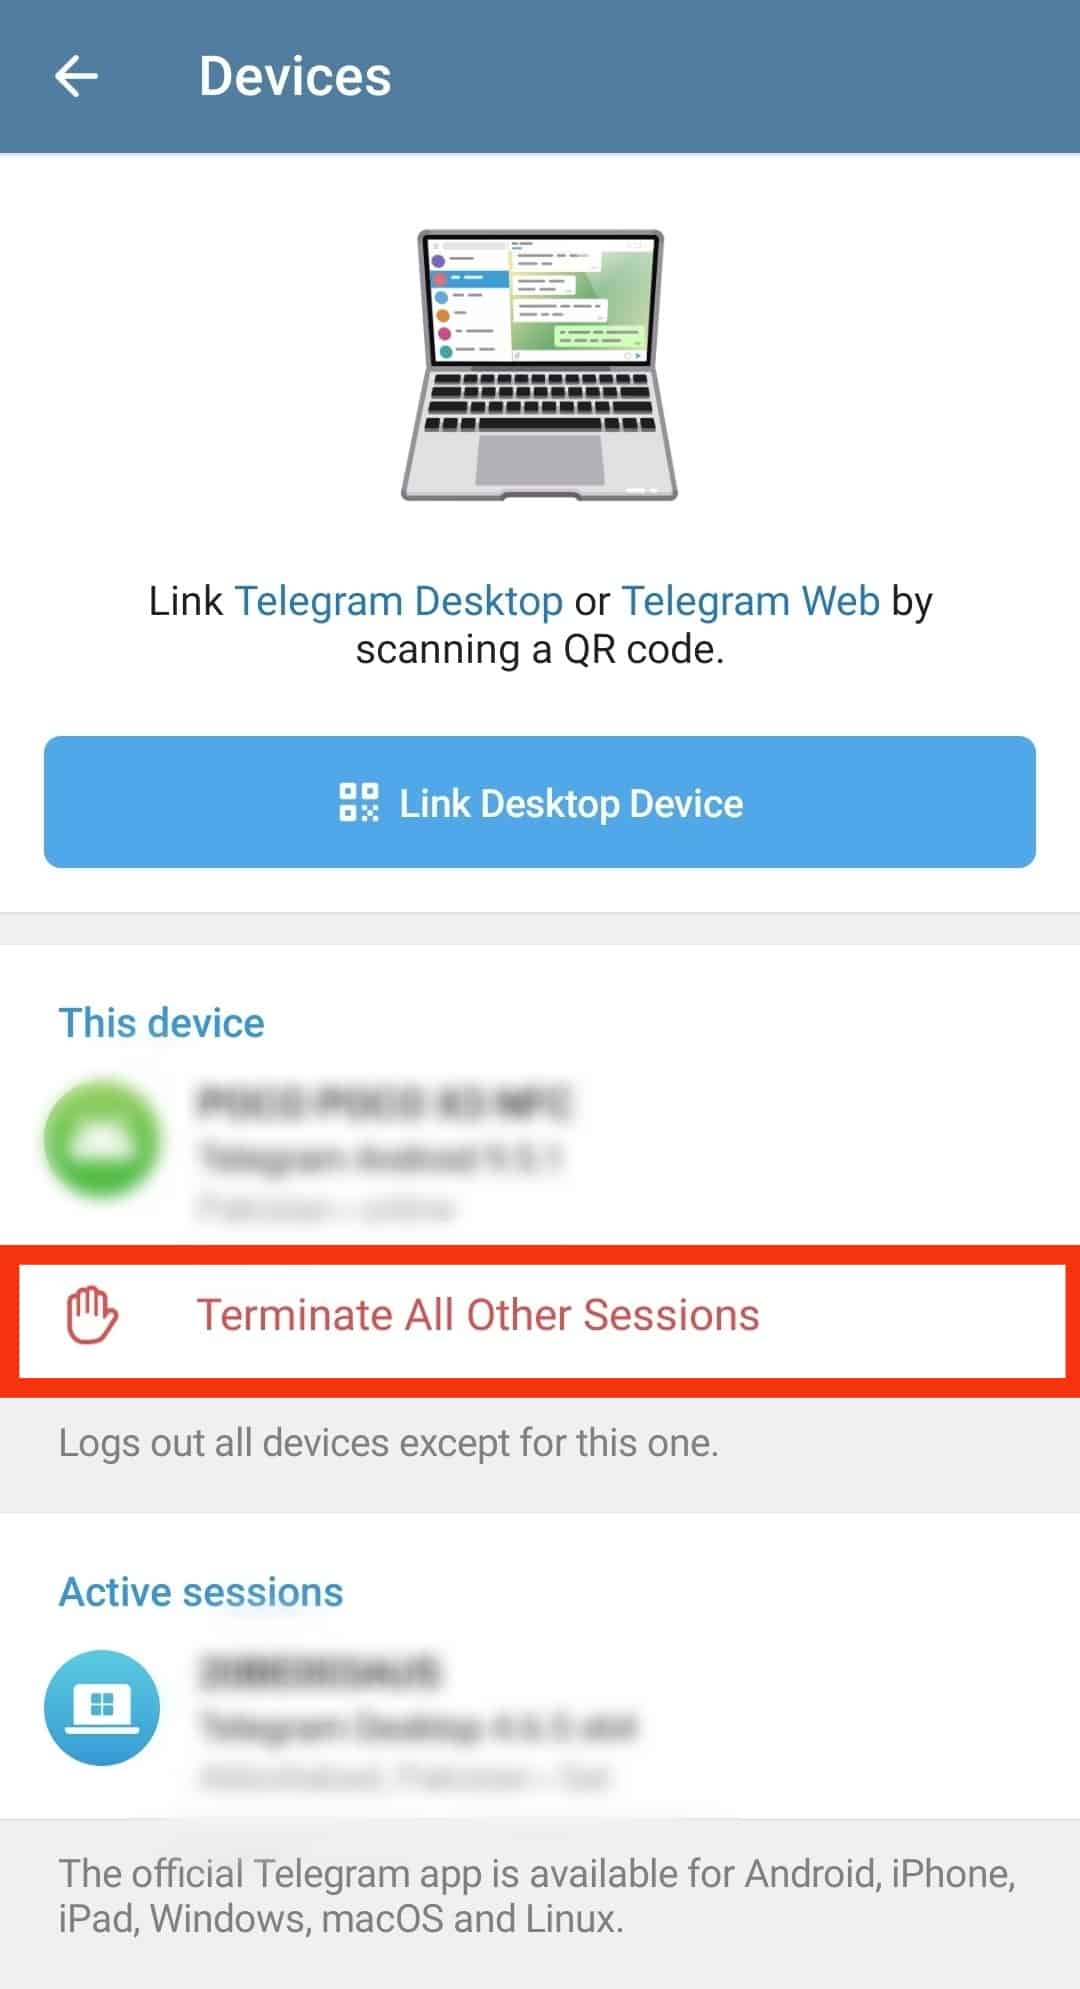 Click Terminate All Other Sessions